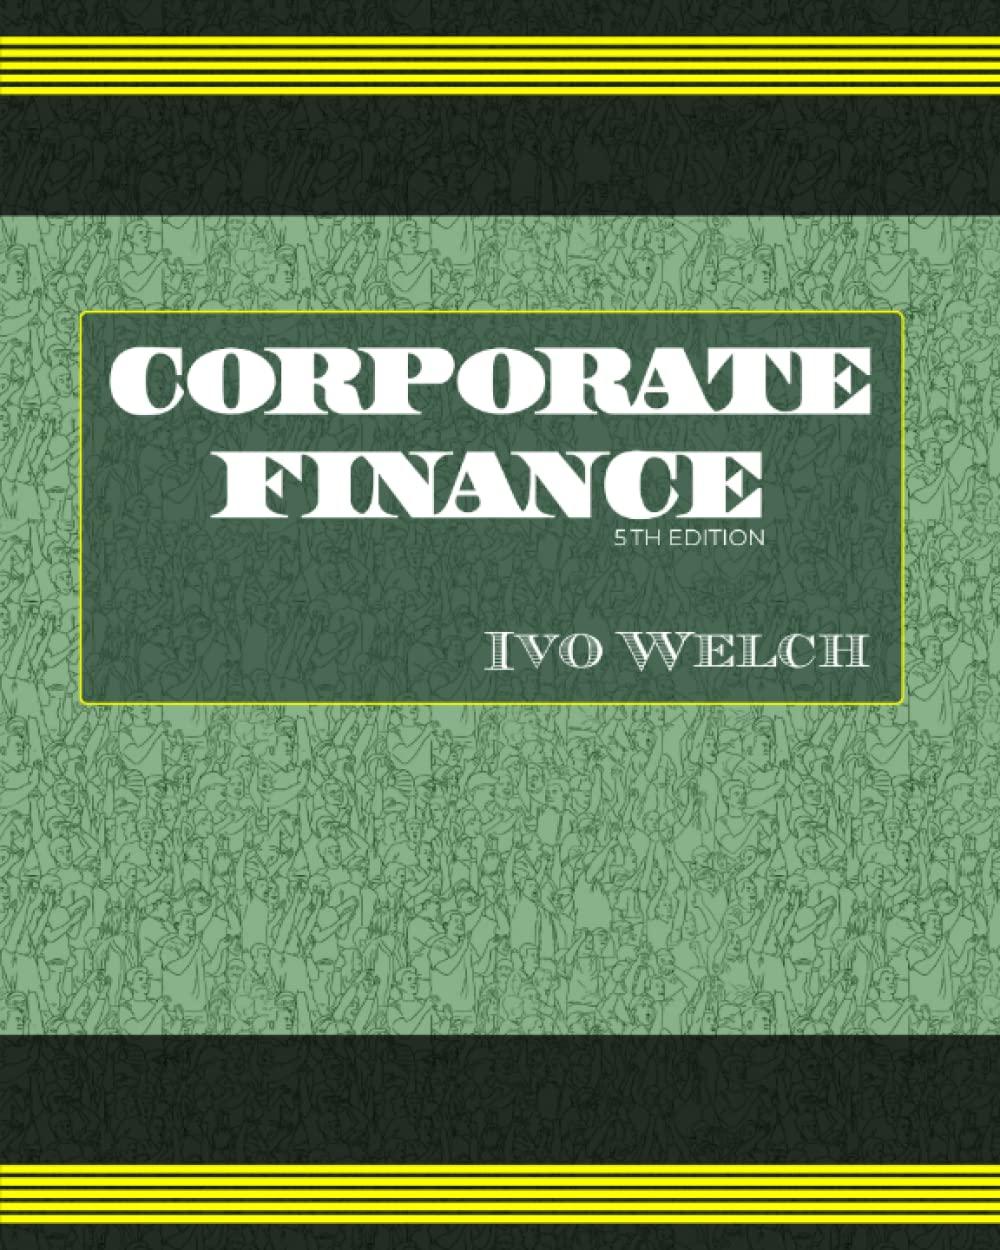 corporate finance 5th edition ivo welch 0984004904, 978-0984004904